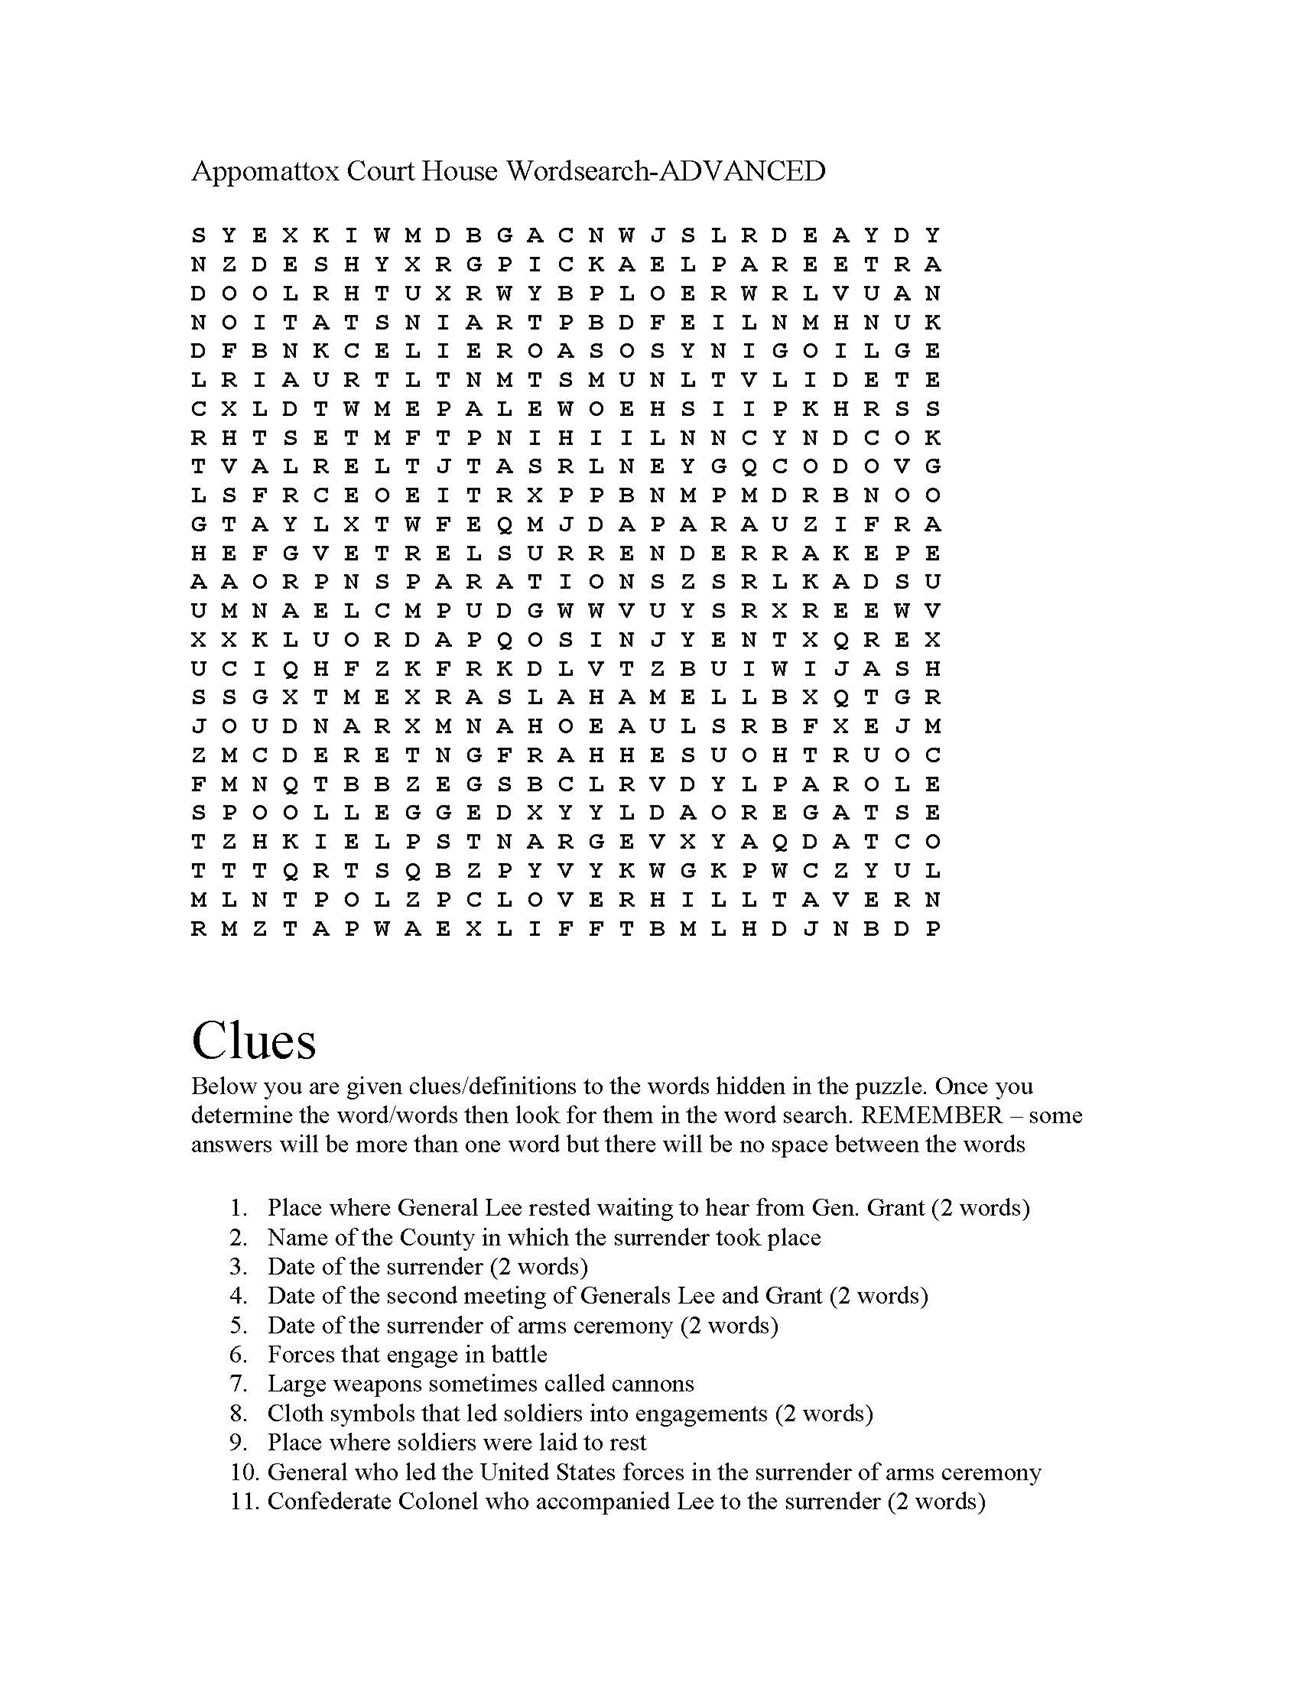 14 - Appomattox Court House Word Search - Advanced_Page_1